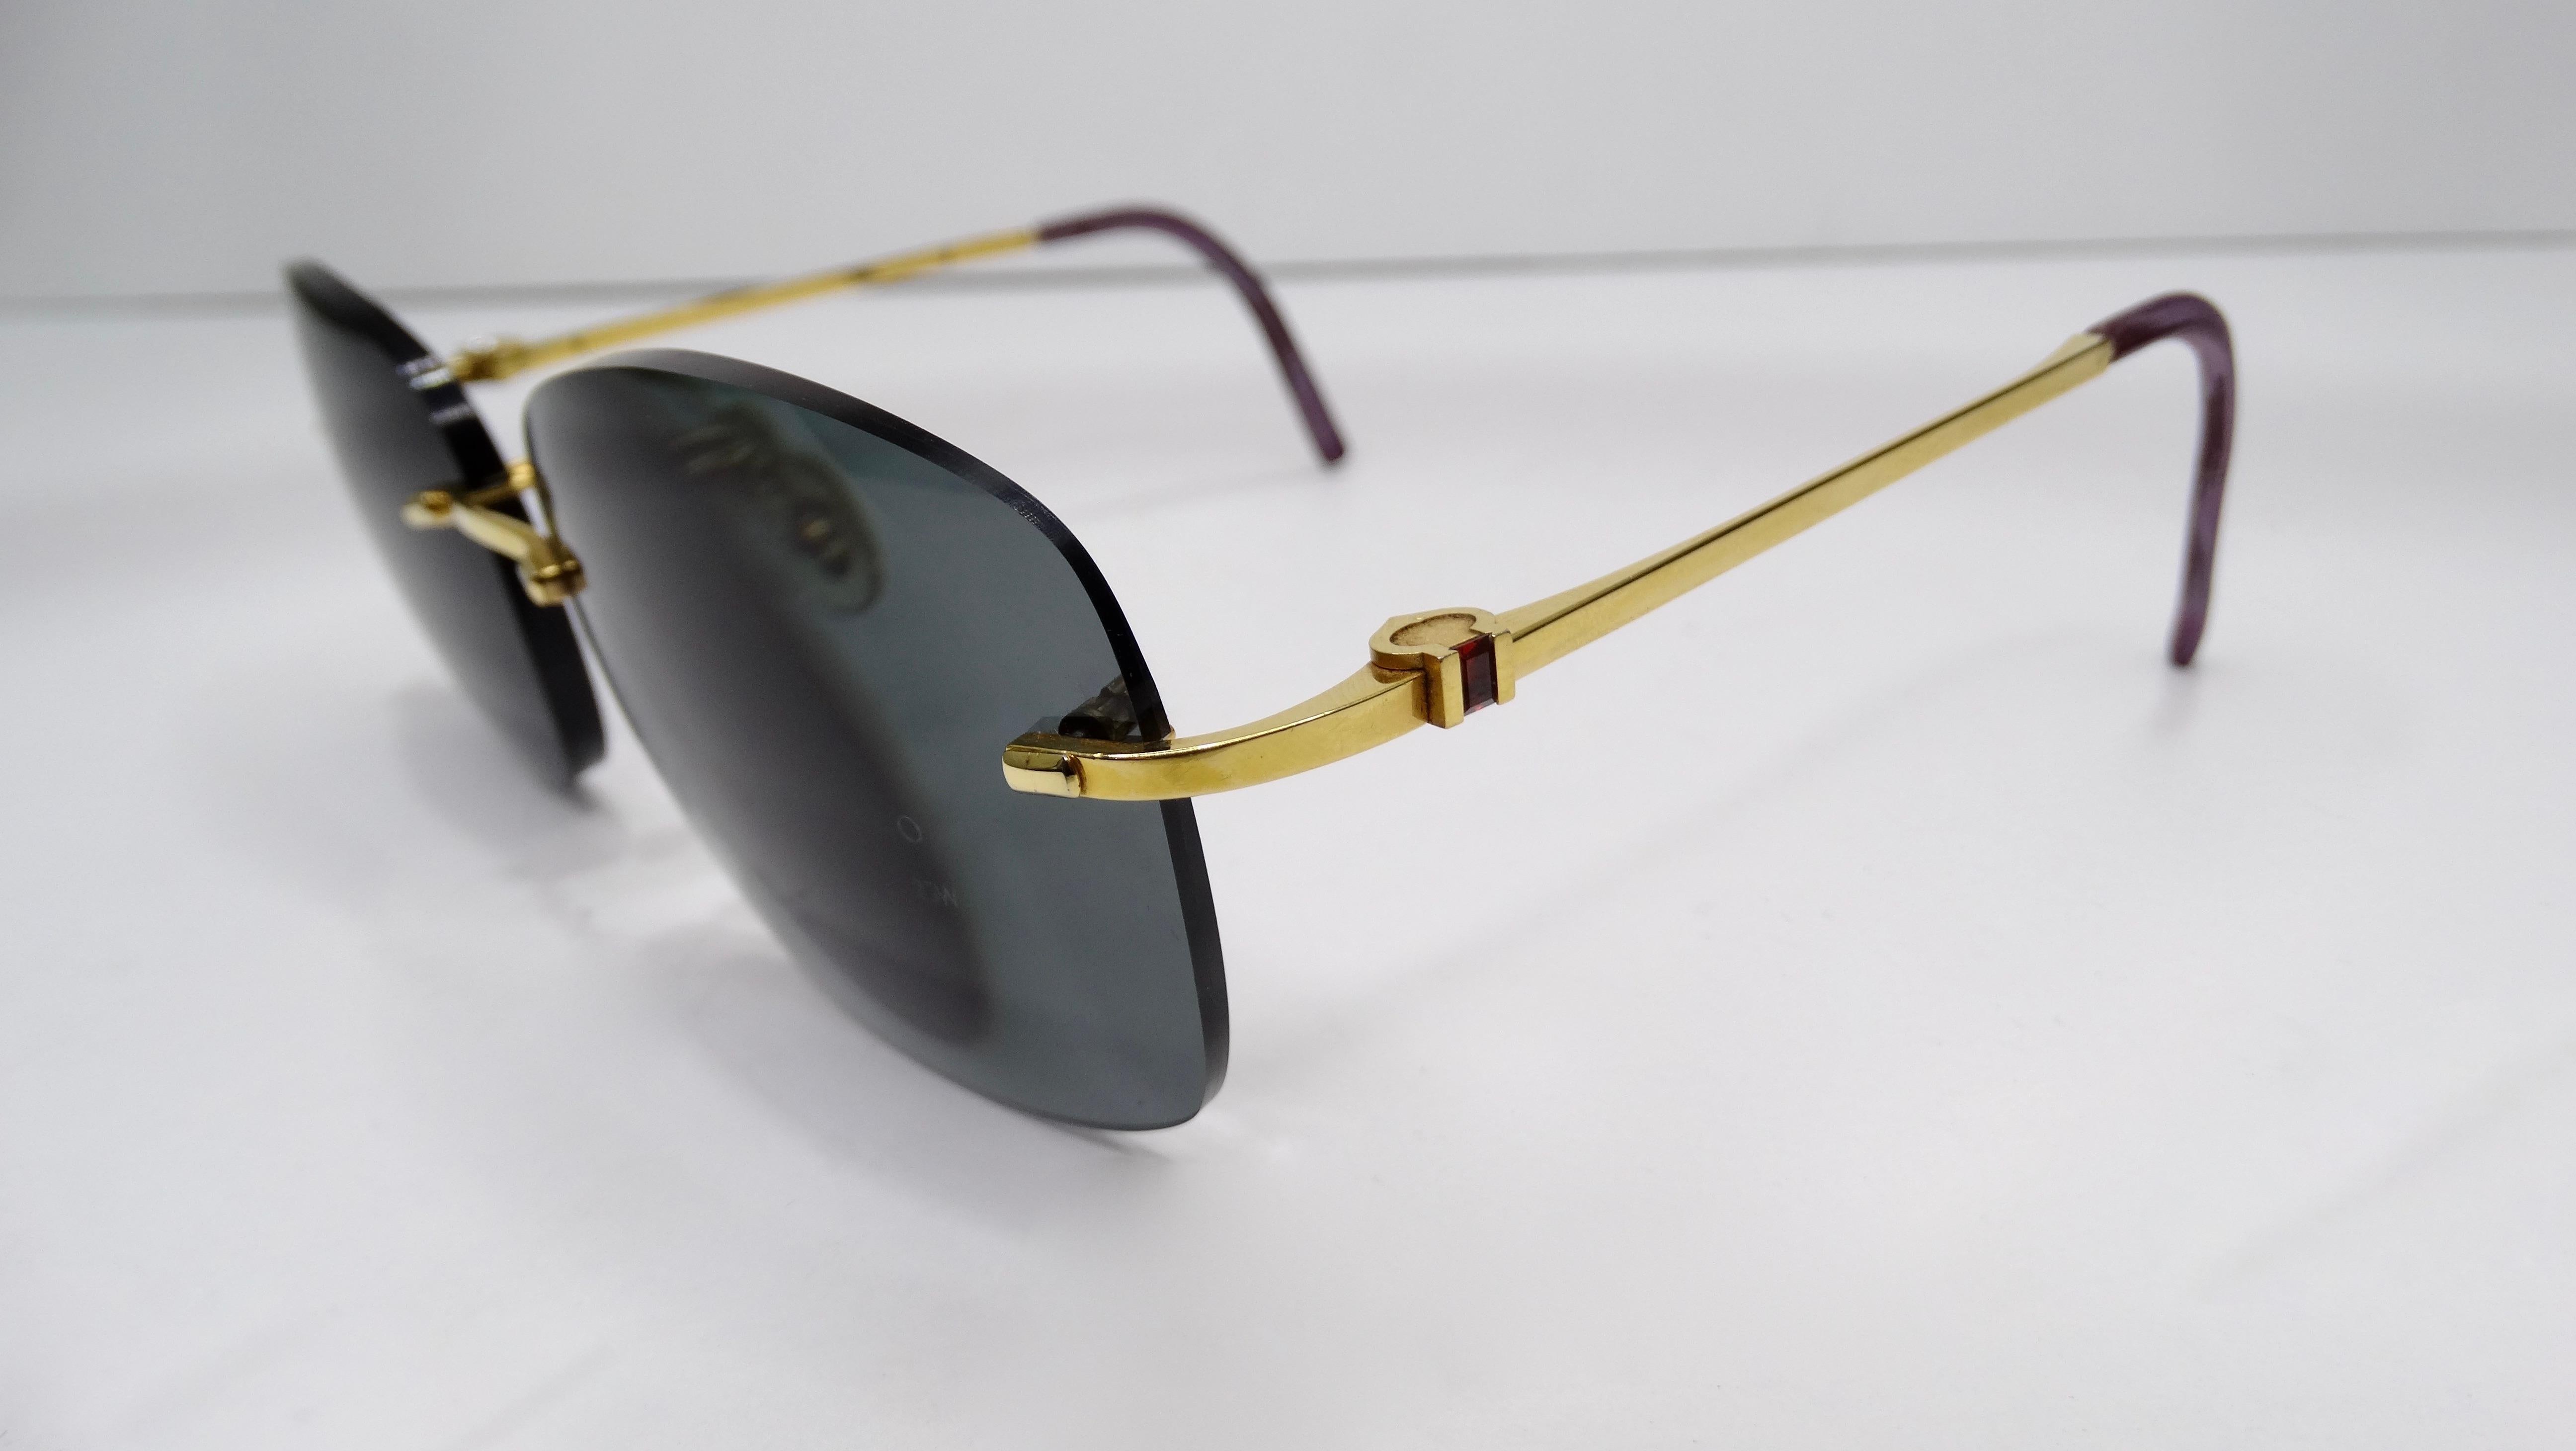 A favorite of both jewelry and fashion lovers, Cartier is always a classic! Circa 1980s, these rimless sunglasses feature an 18k gold plated frame with a small red granite on each arm. Cartier stamping throughout. The lenses in these sunglasses are